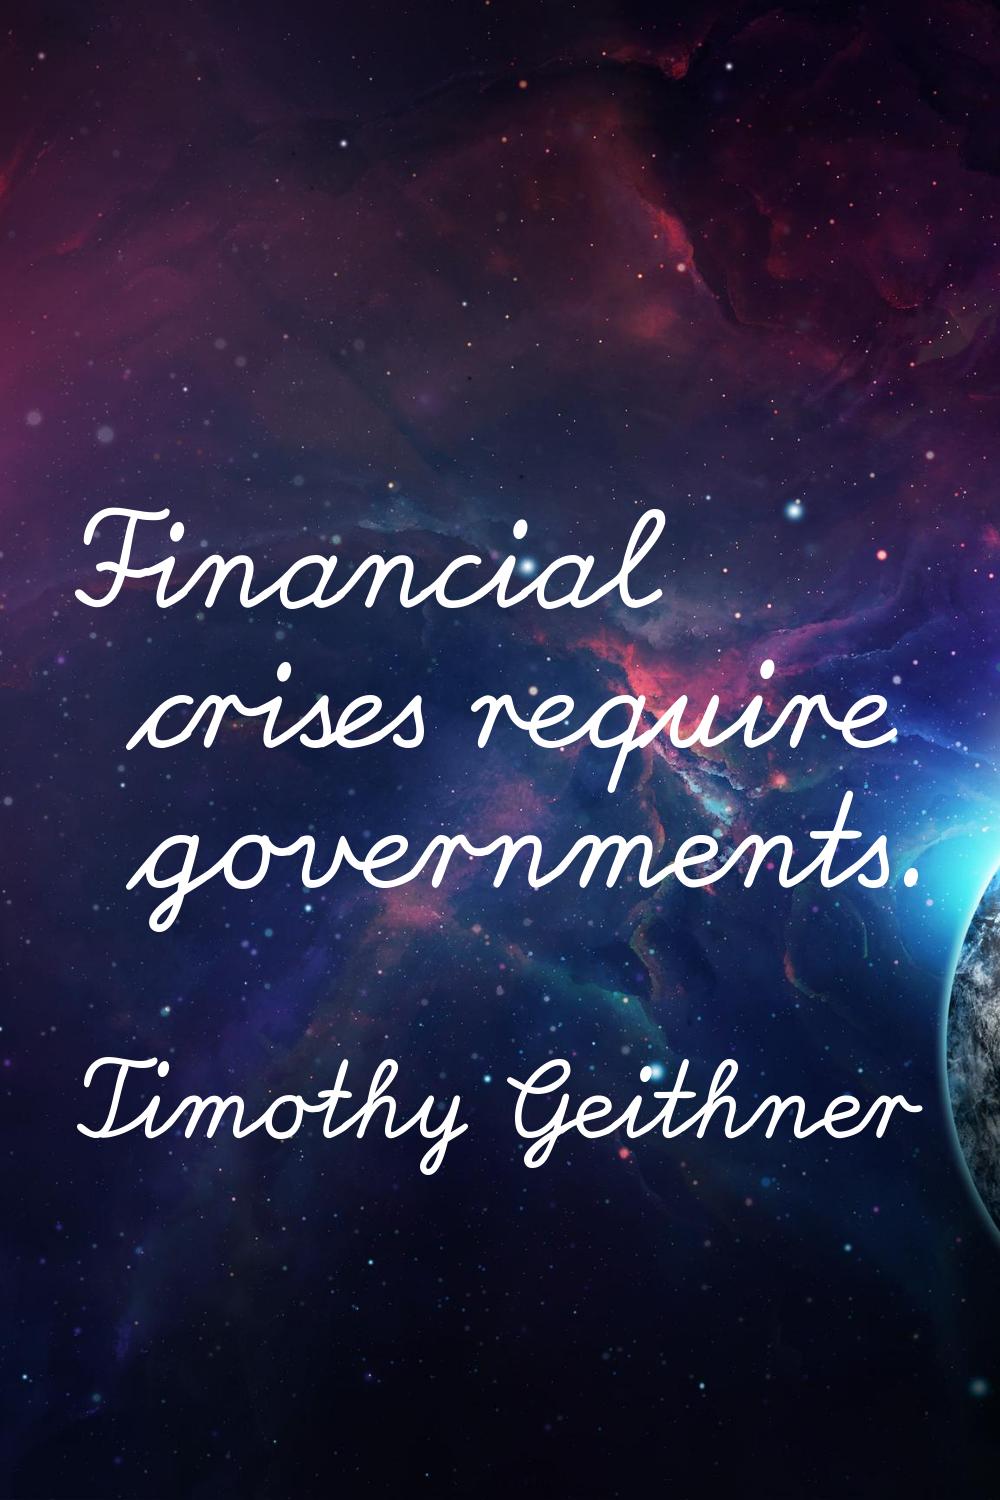 Financial crises require governments.